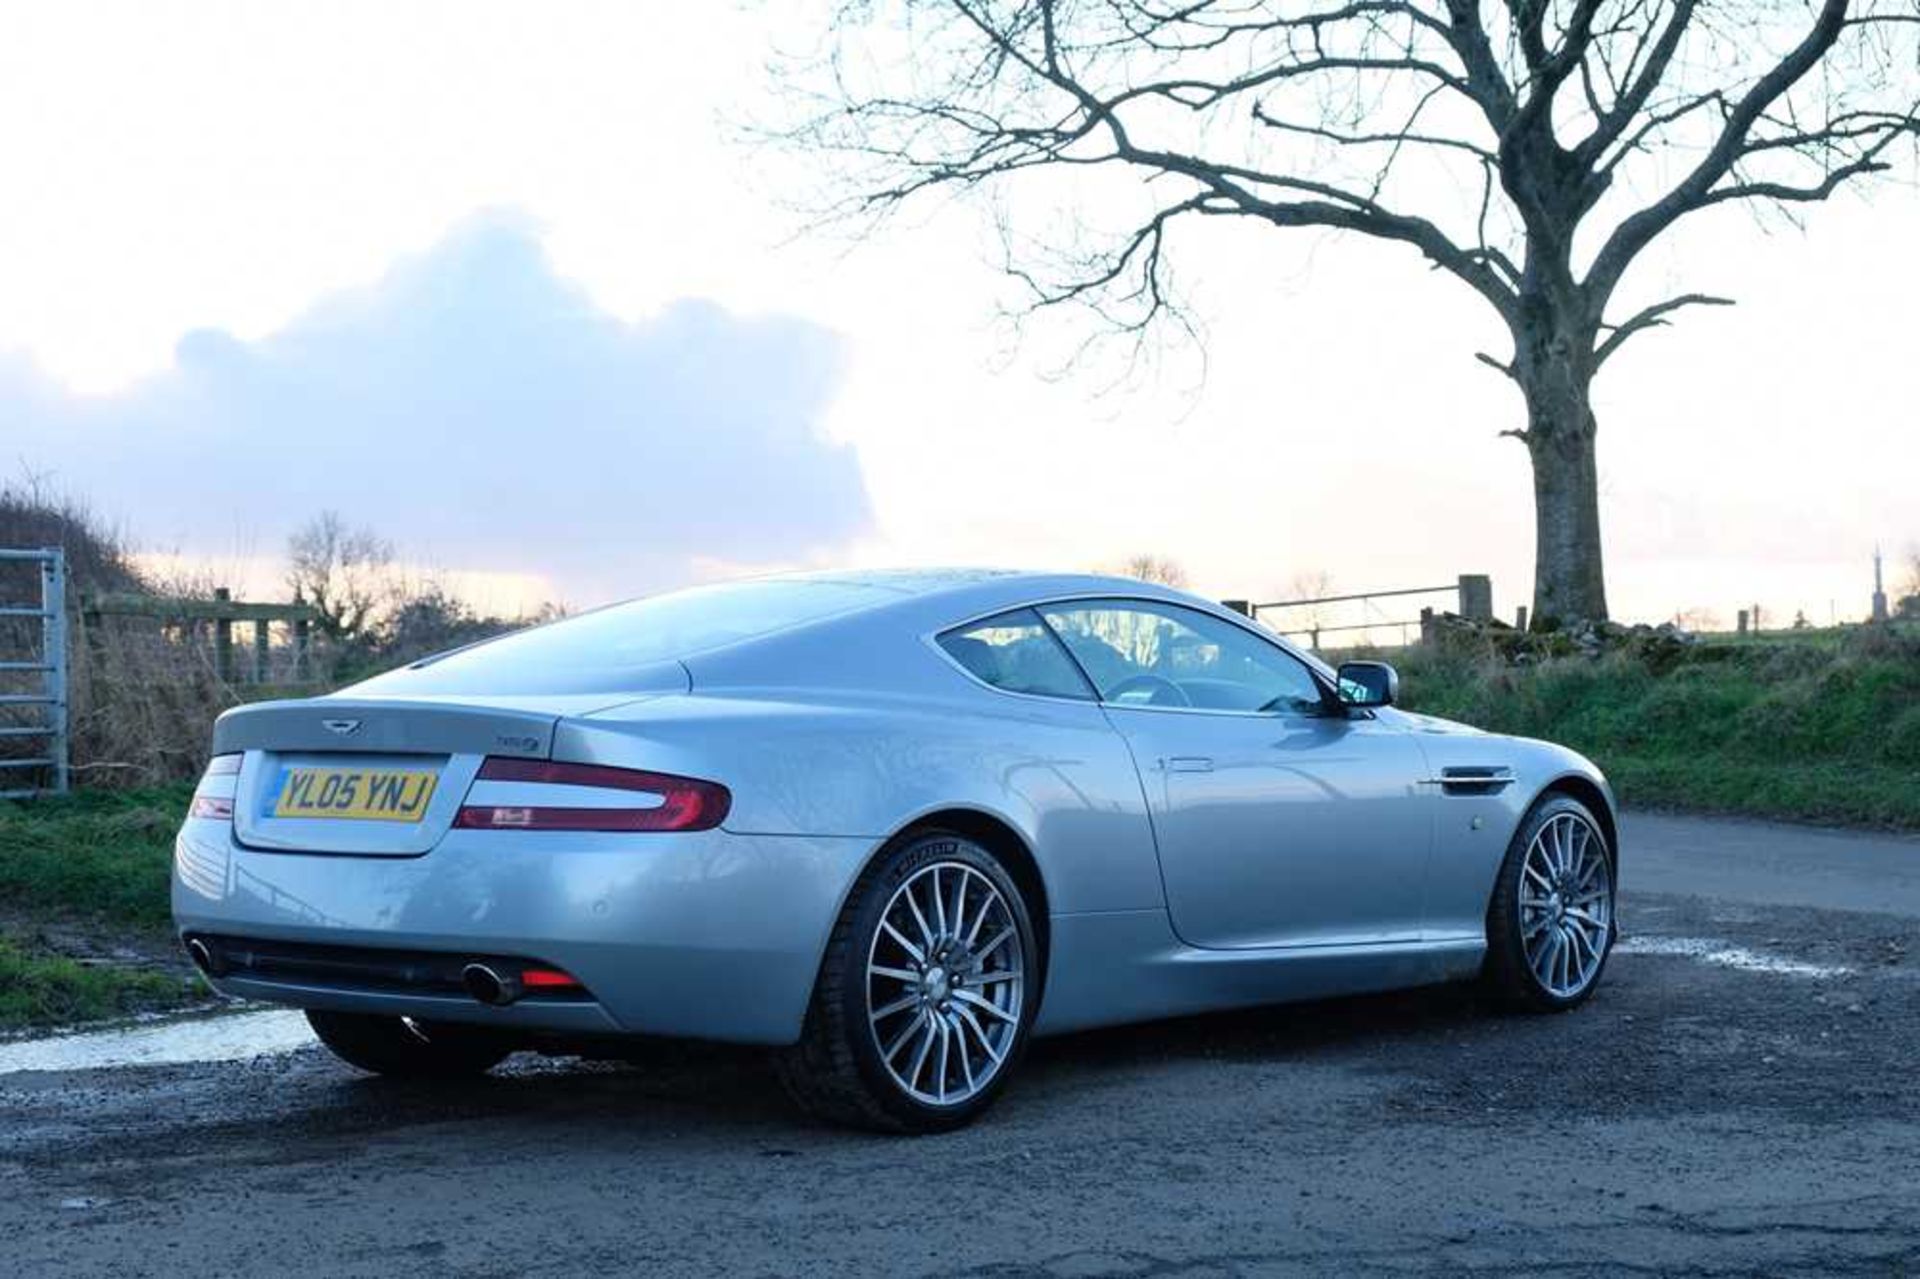 2005 Aston Martin DB9 c.25,000 from new and 4 former keepers - Image 24 of 59